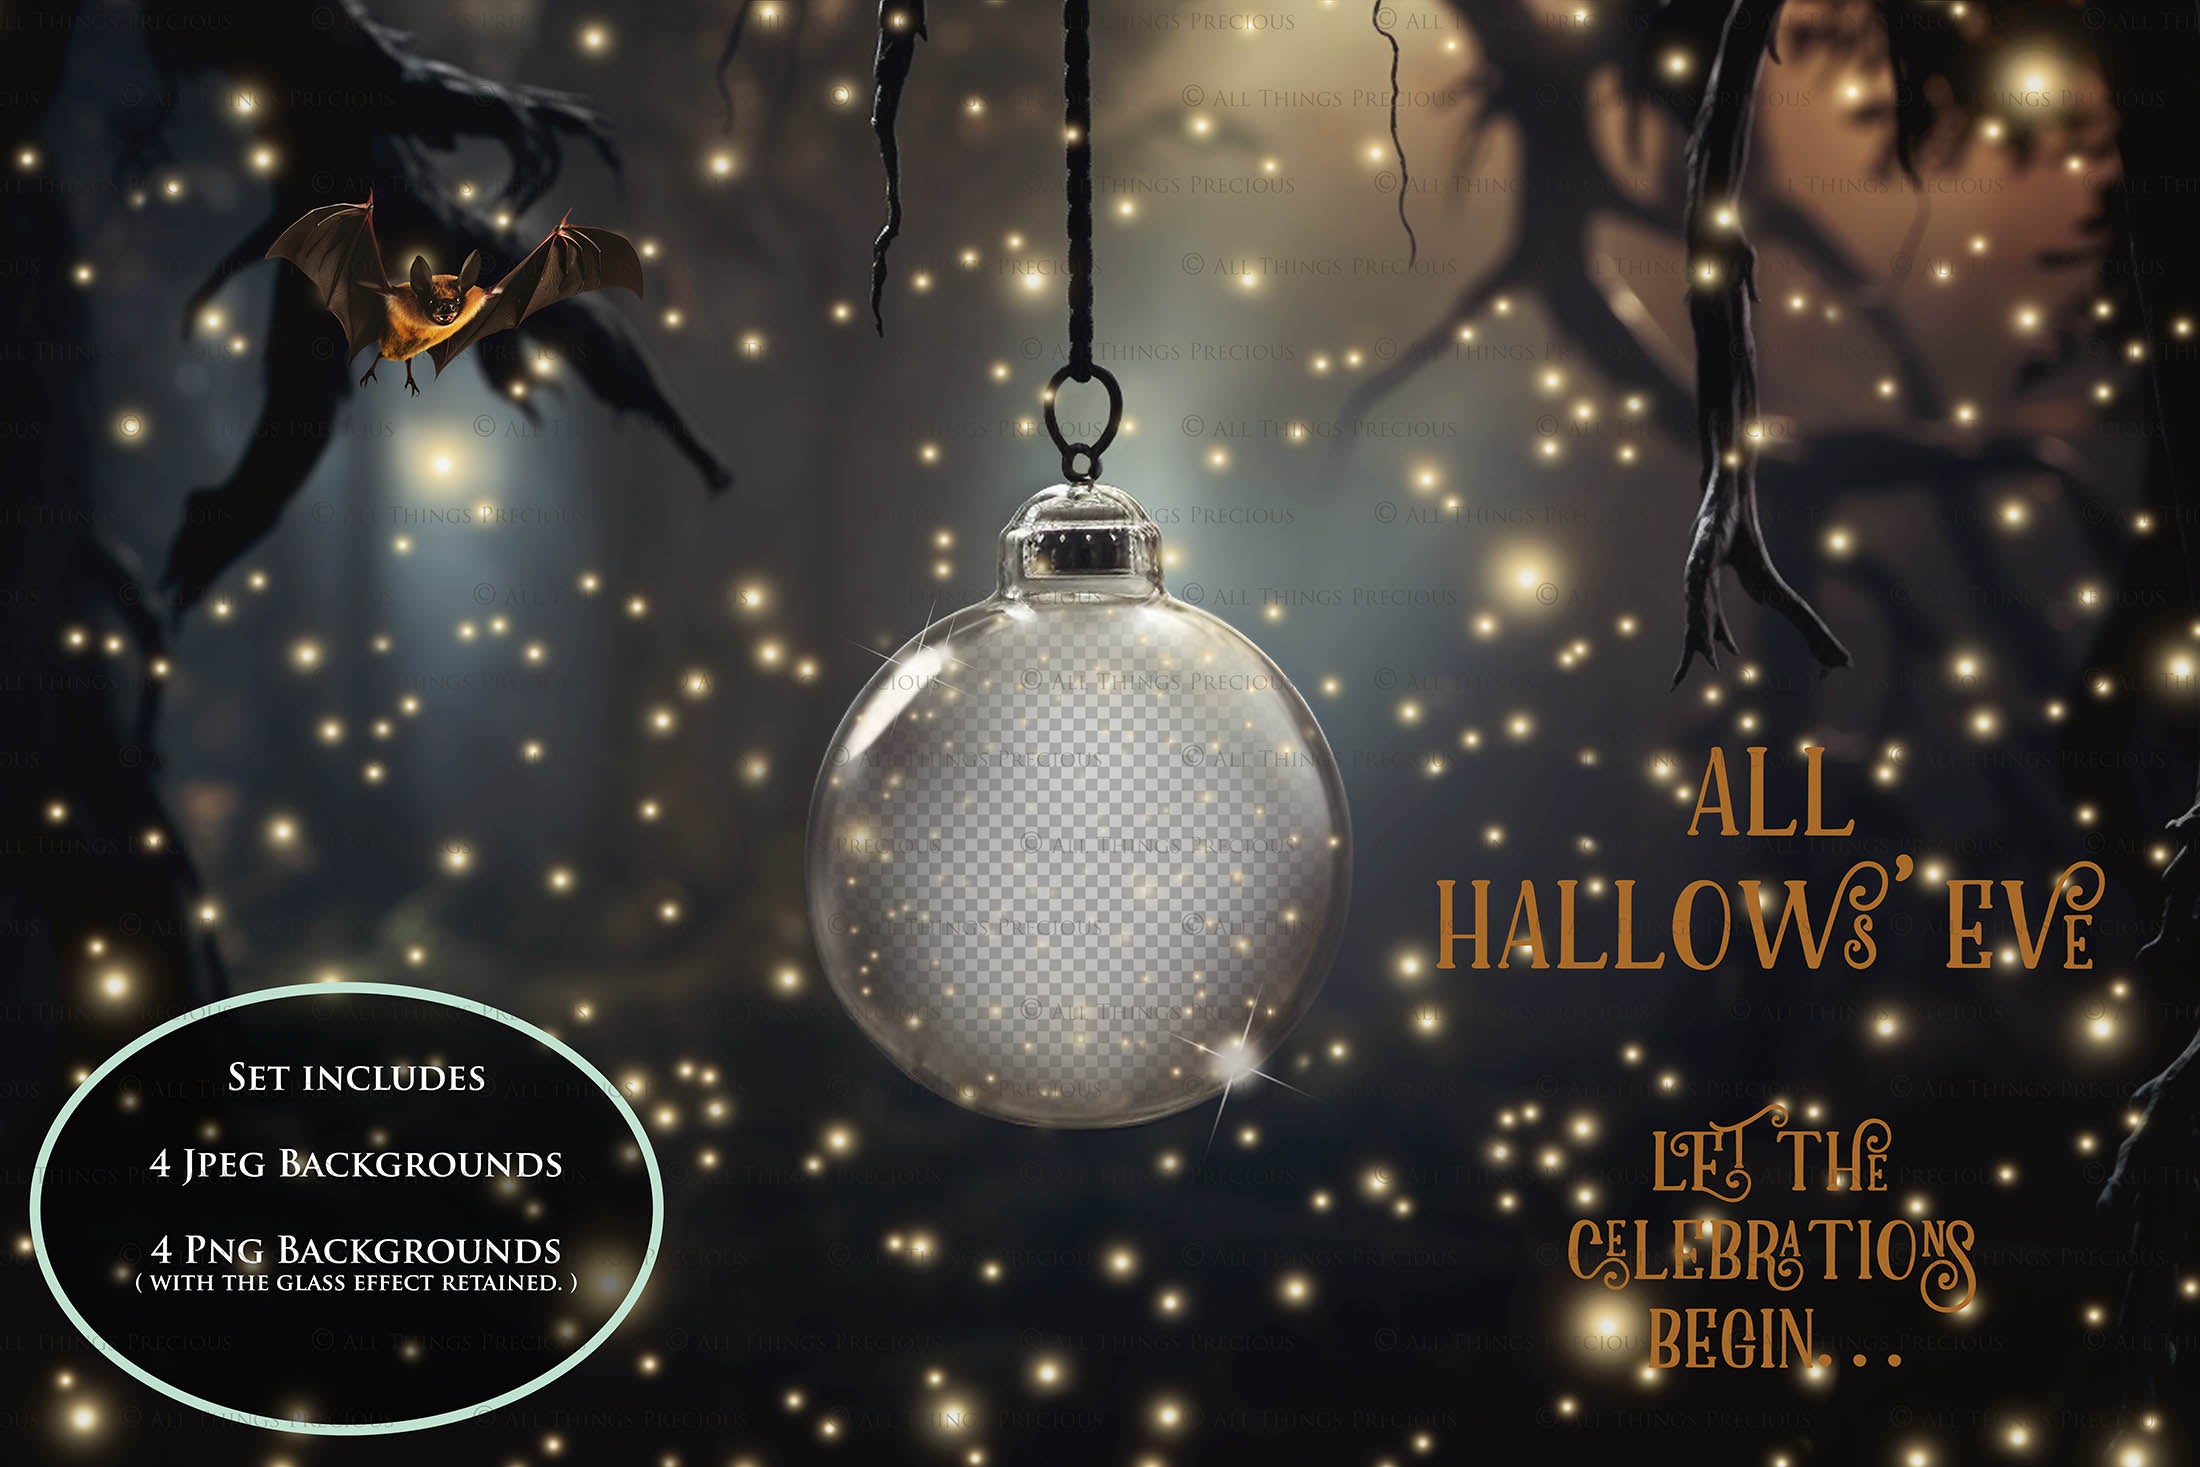 Magical Halloween Template Background. Snow globe with overlays. Add a photo to the digital background. Glass Effect Ornament bauble. Jpeg and Png copies. With magic overlays included. High resolution, quality files for photography, scrapbooking. ATP Textures